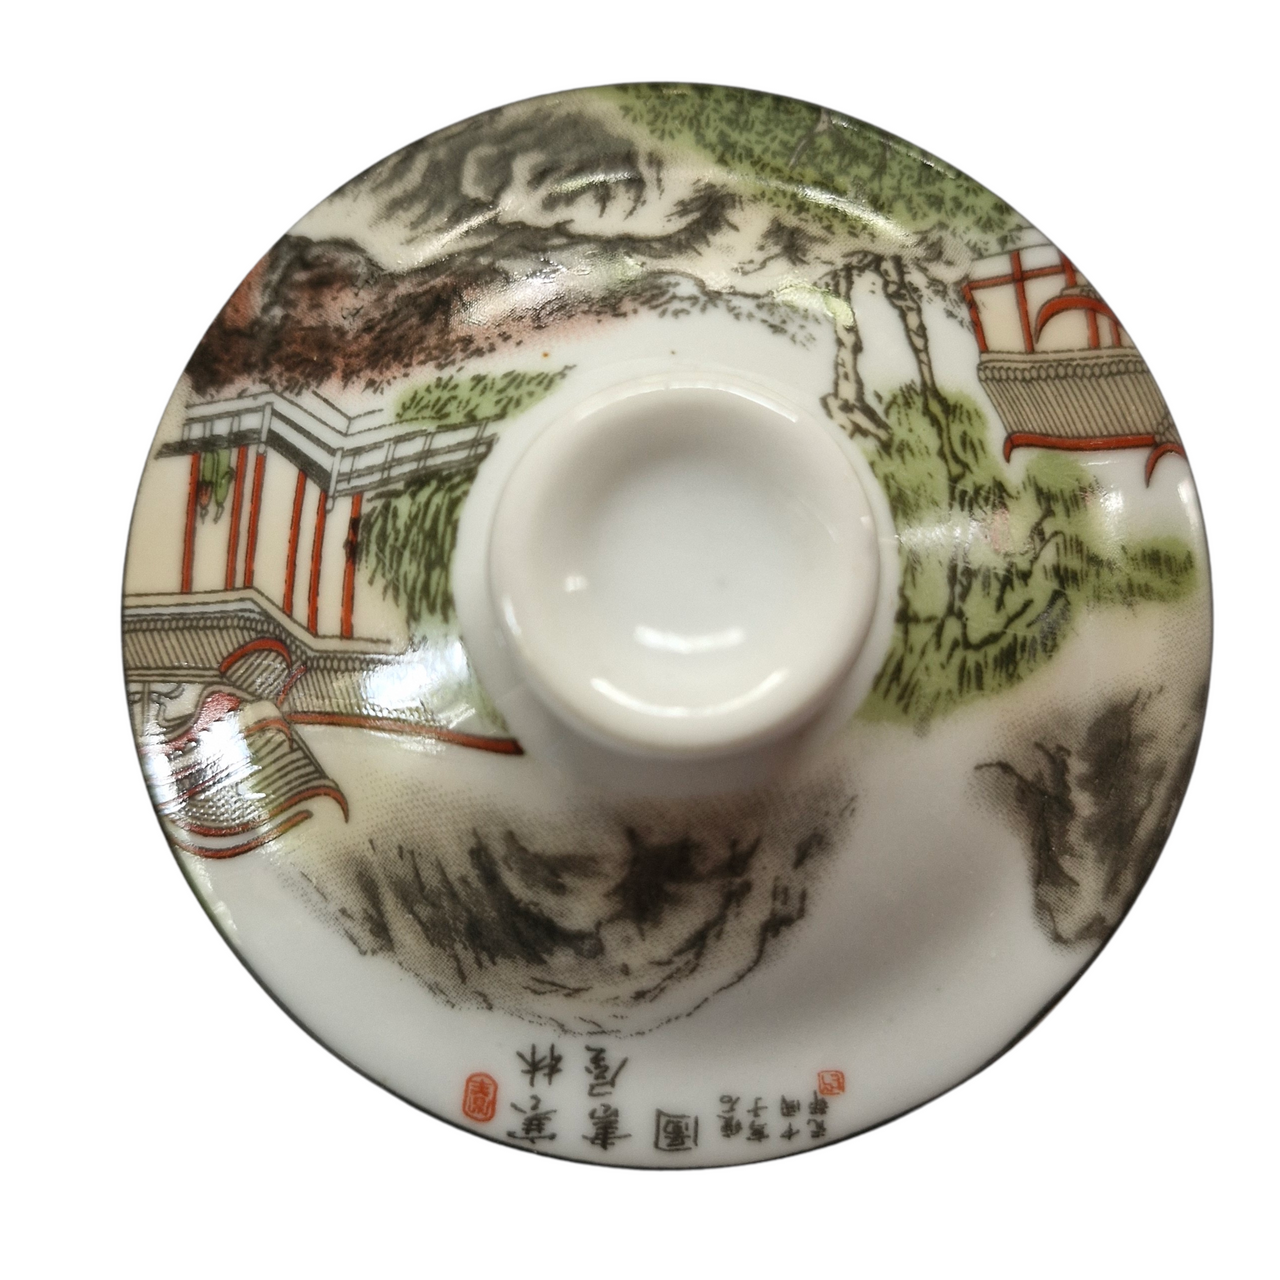 Replacement Ceramic Lid for Chinese Tea Mug HQM016